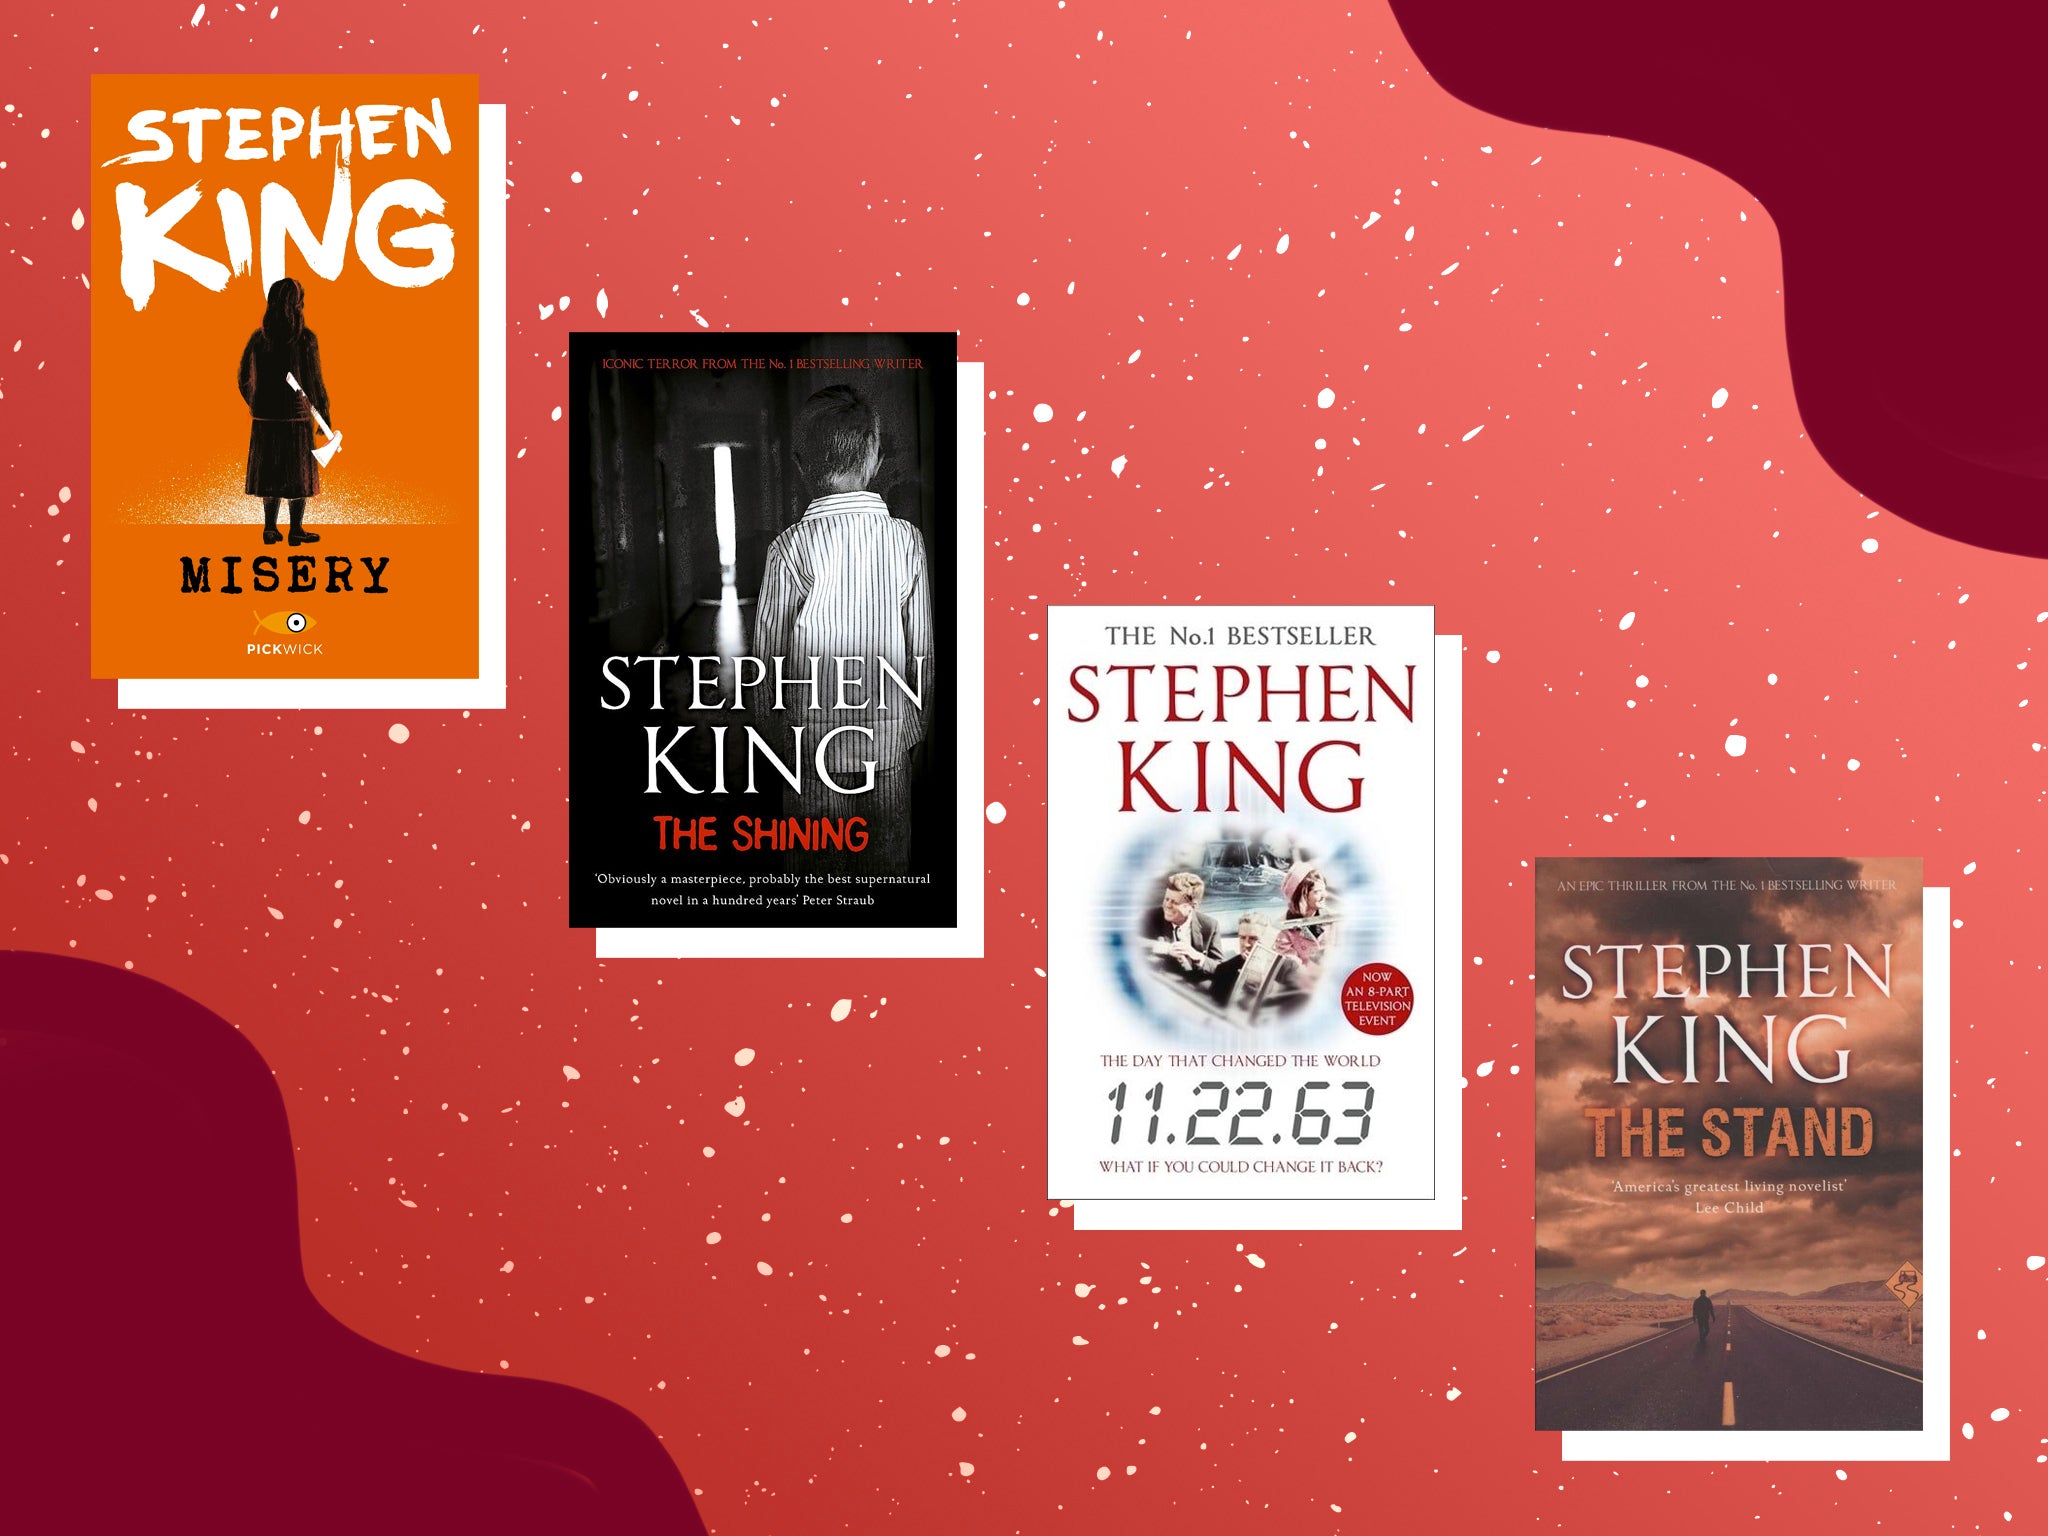 We looked not only for King’s best ideas, but his best writing – and a story that pulled you in, irrespective of genre